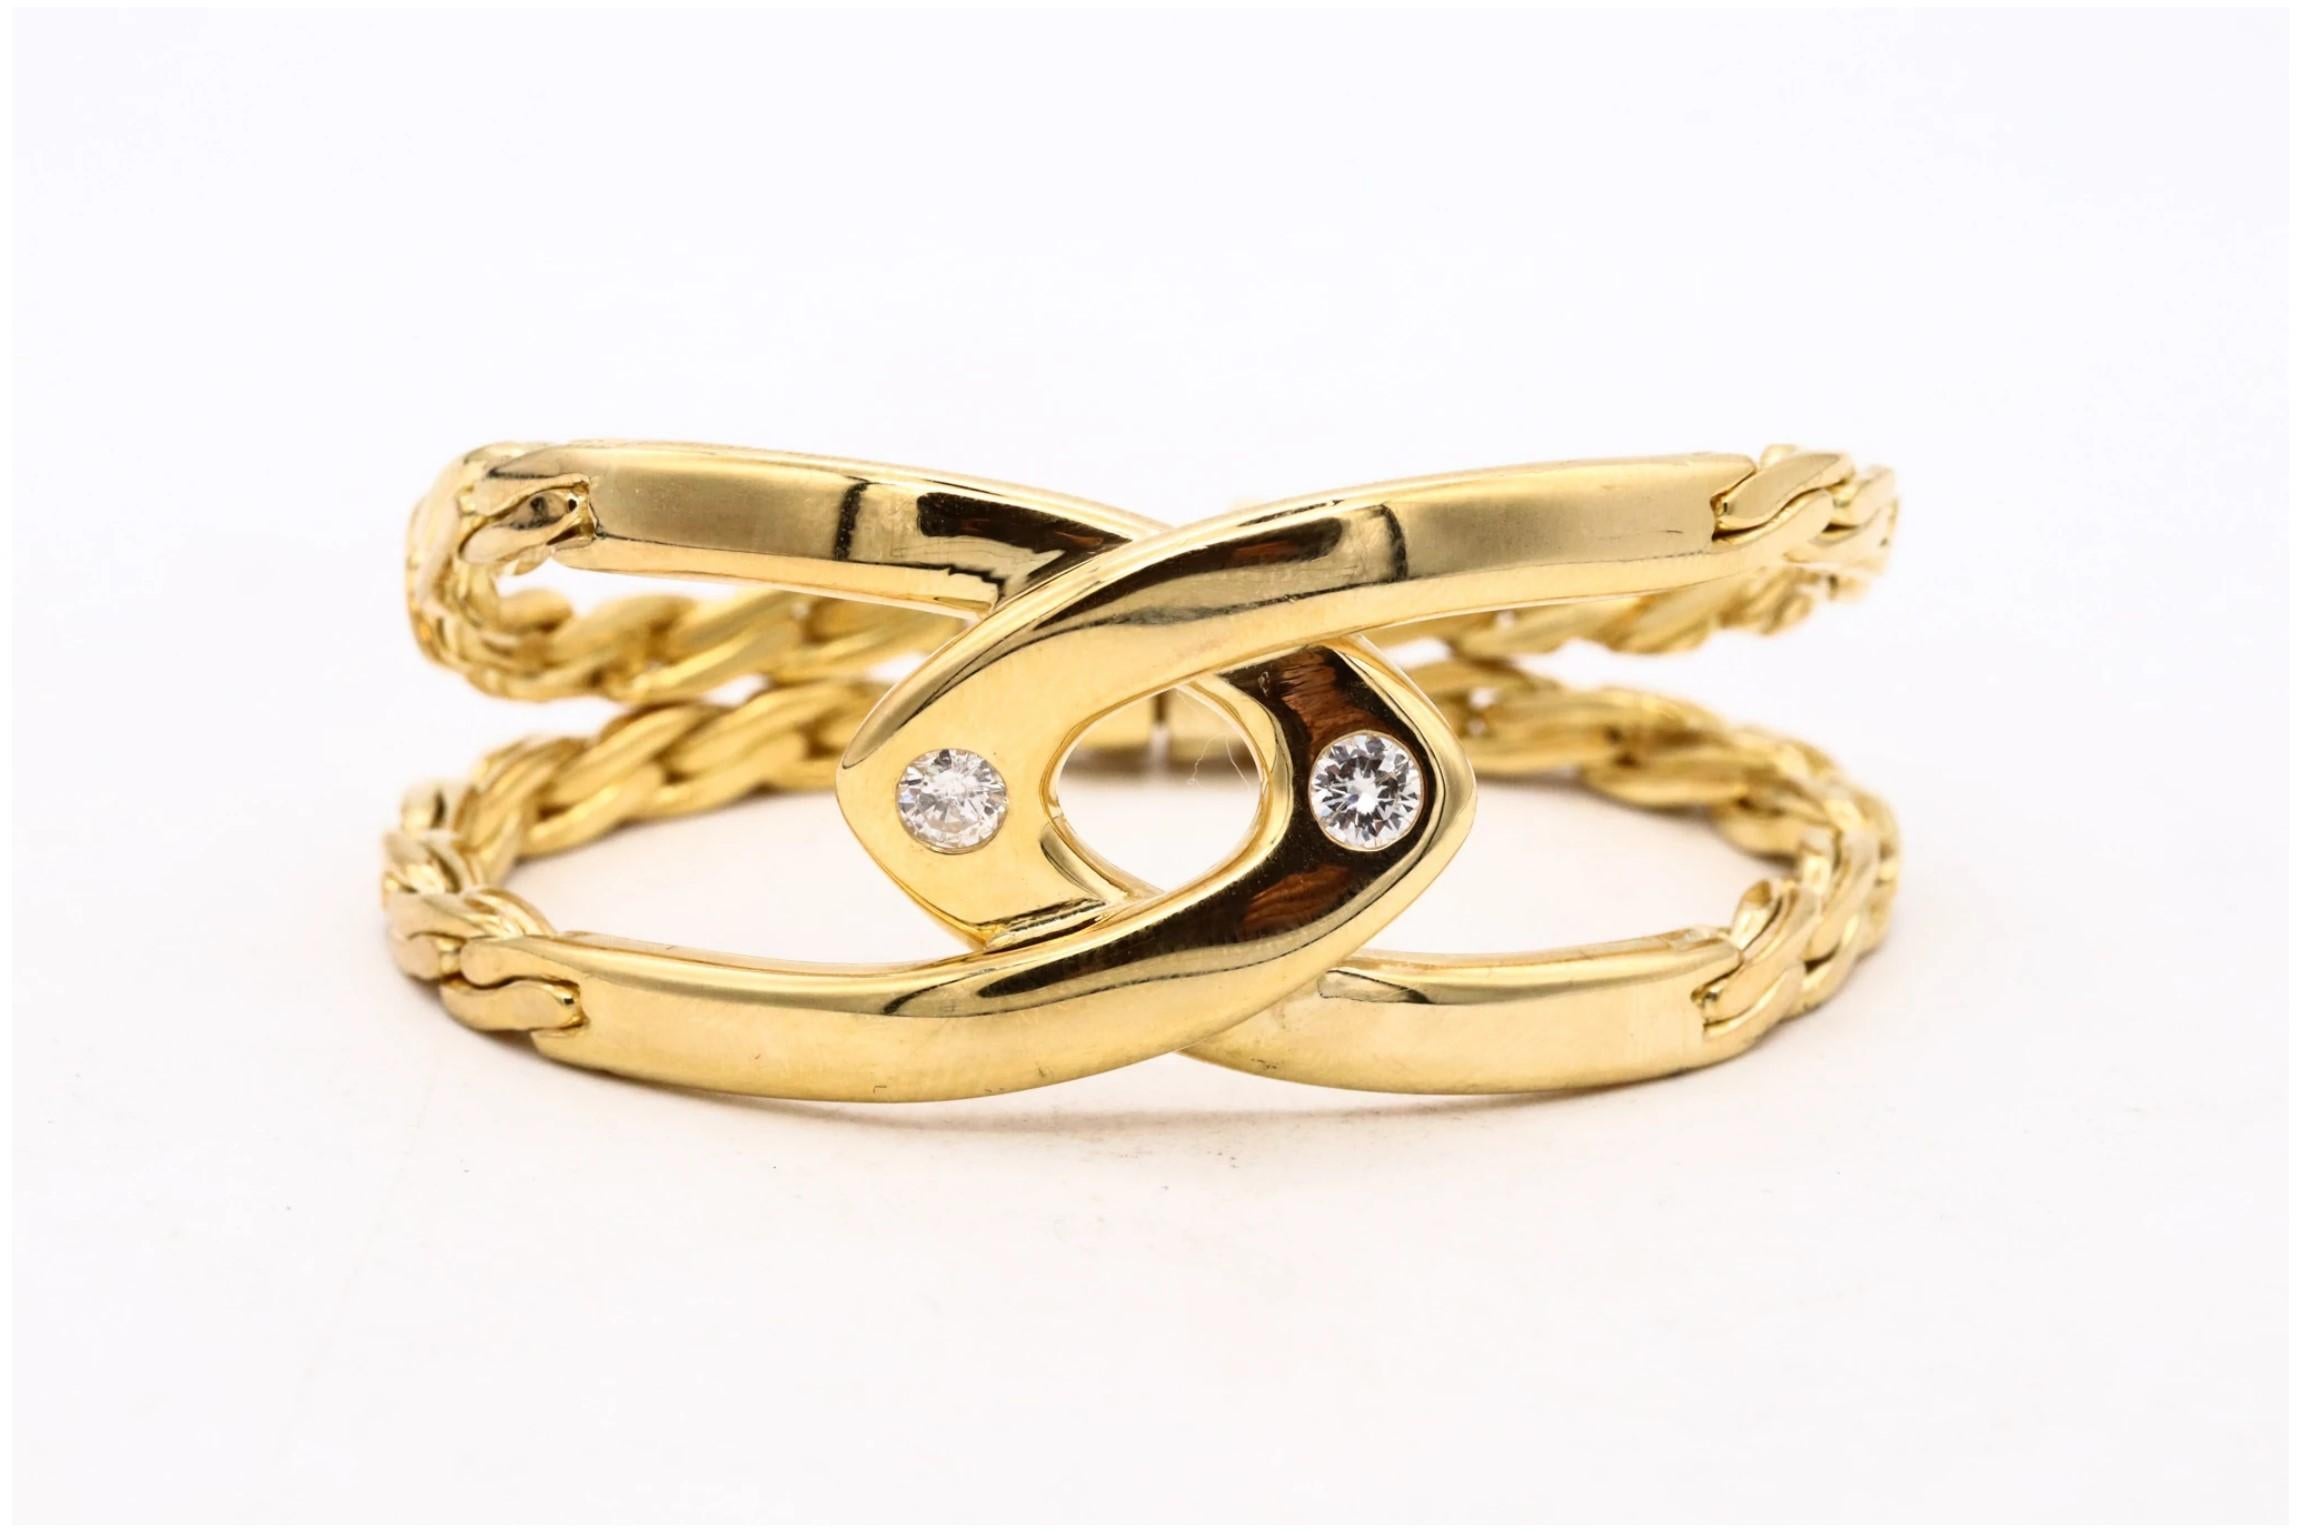 Modern bracelet designed by Cartier.

A magnificent and rare Double C chained flexible bracelet made in Paris France by the house of Cartier. it was crafted in solid 18 karats of very high polished yellow gold and suited, with a boxed push lock,